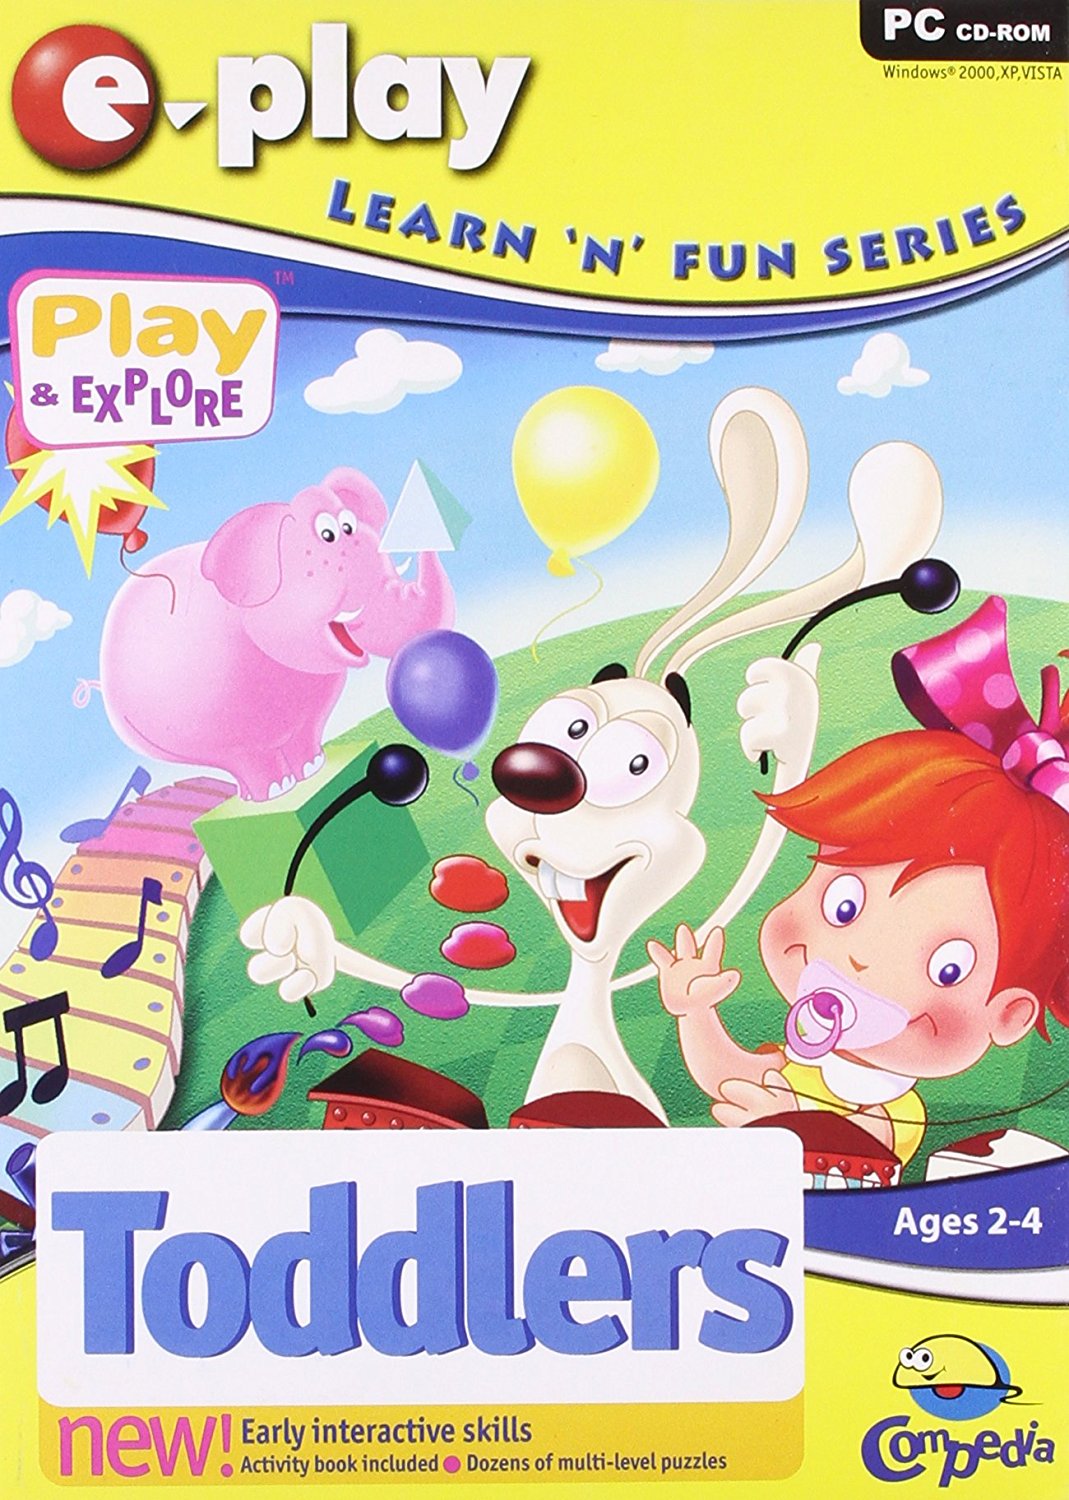 Amazon: Buy Compedia Toddlers (PC) for Rs 25 only